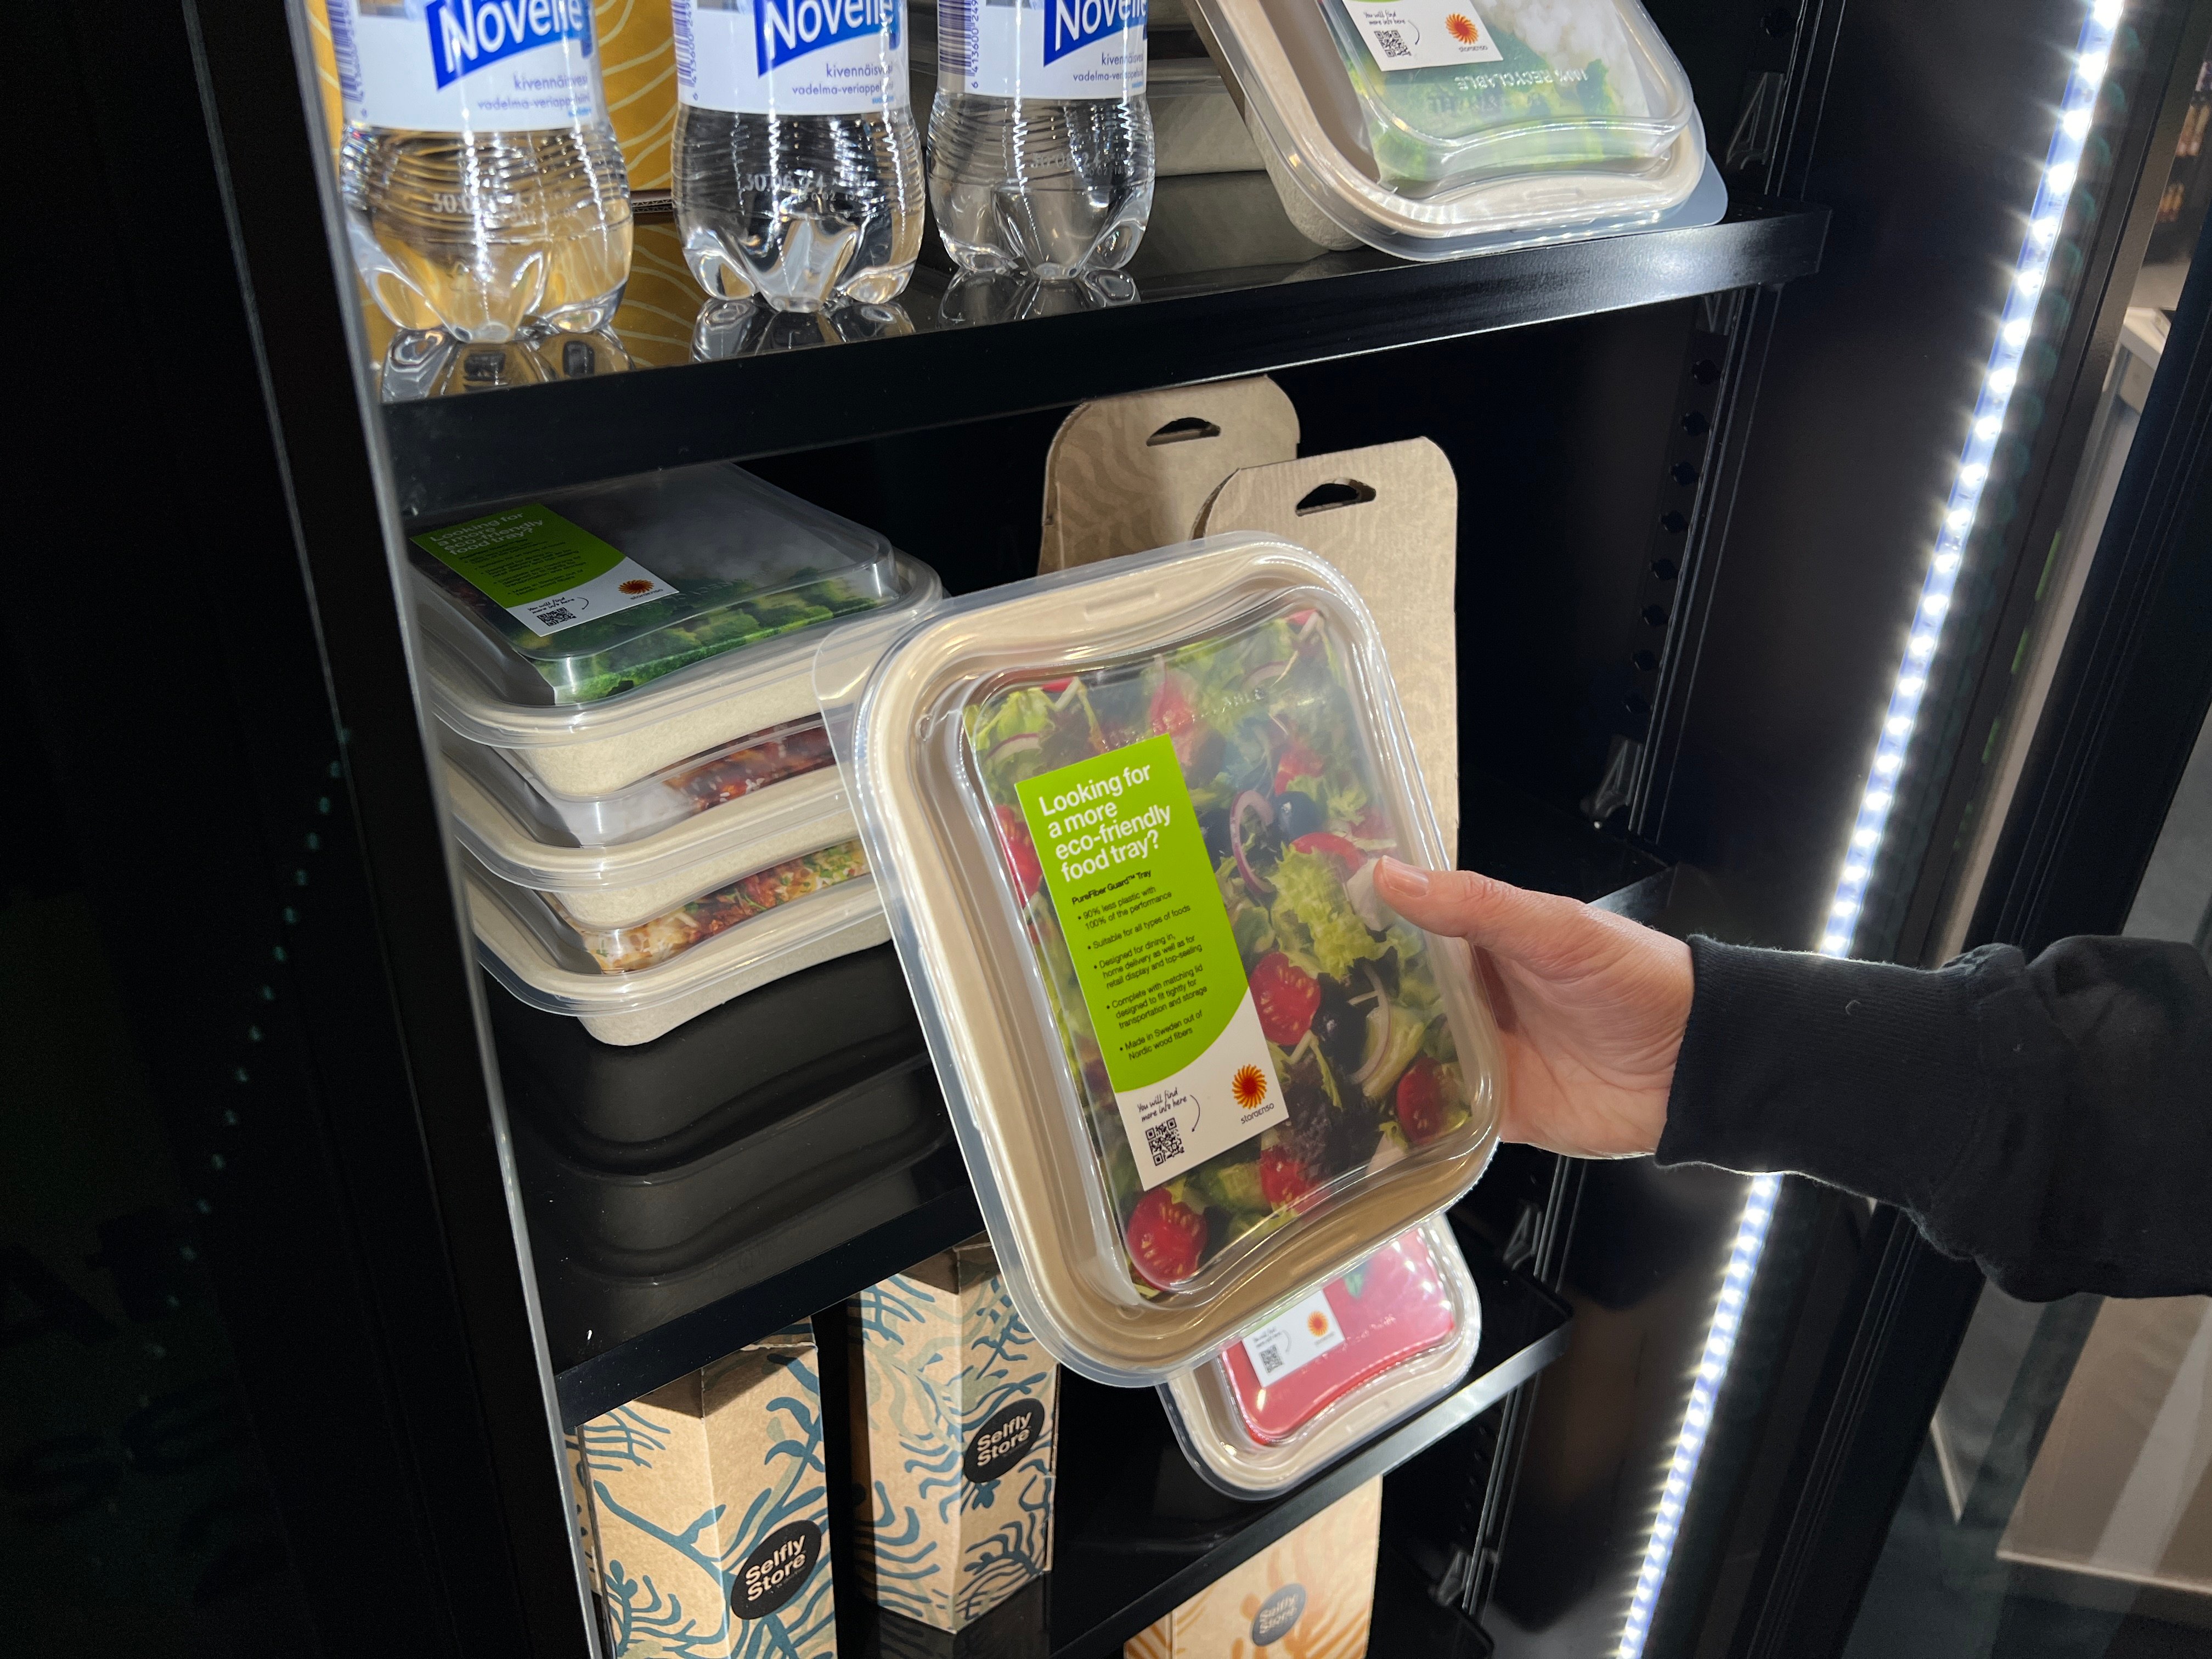 Sallad provided from a smart snack and beverage vending machine